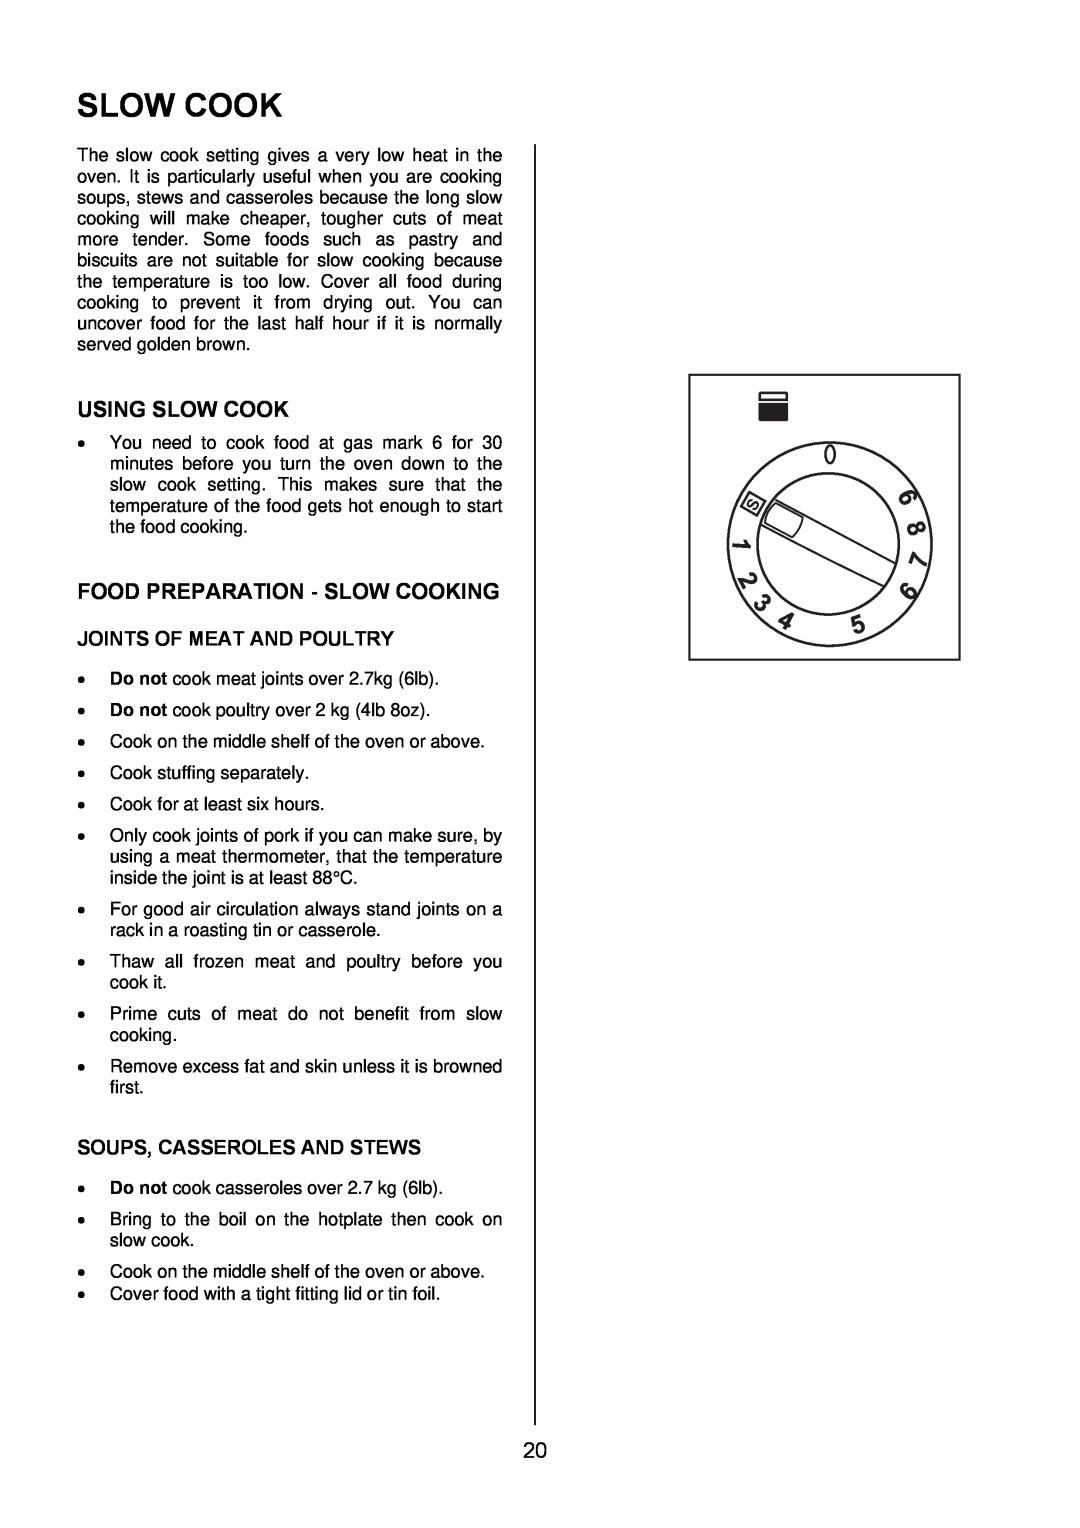 Electrolux EKG6046/EKG6047 manual Using Slow Cook, Food Preparation - Slow Cooking, Joints Of Meat And Poultry 